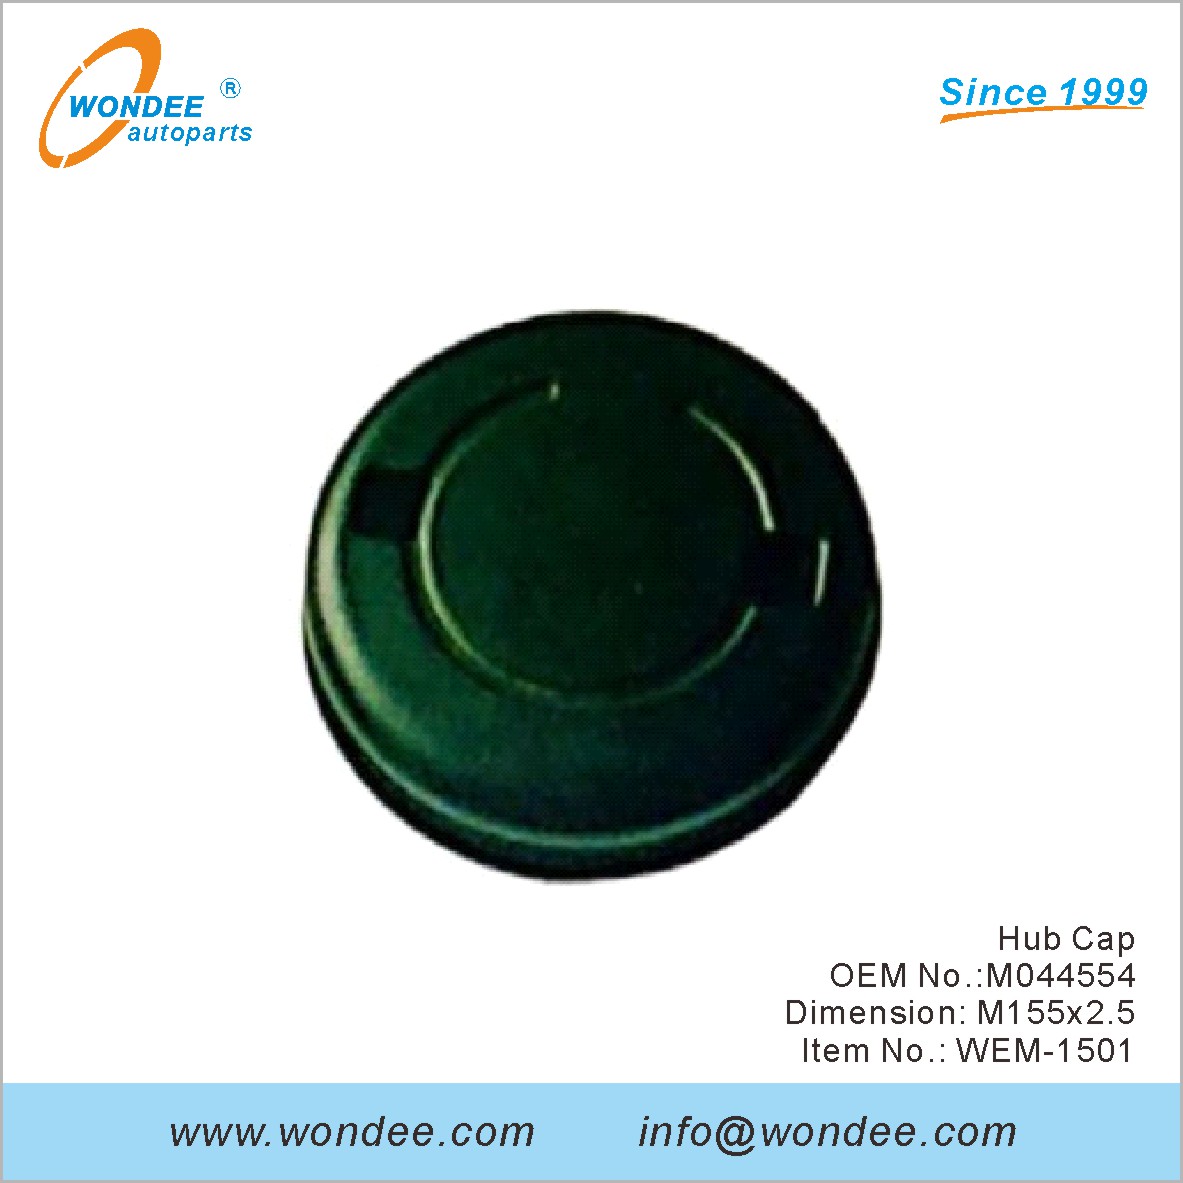 Hub Cap OEM M044554 for engine mouting from WONDEE